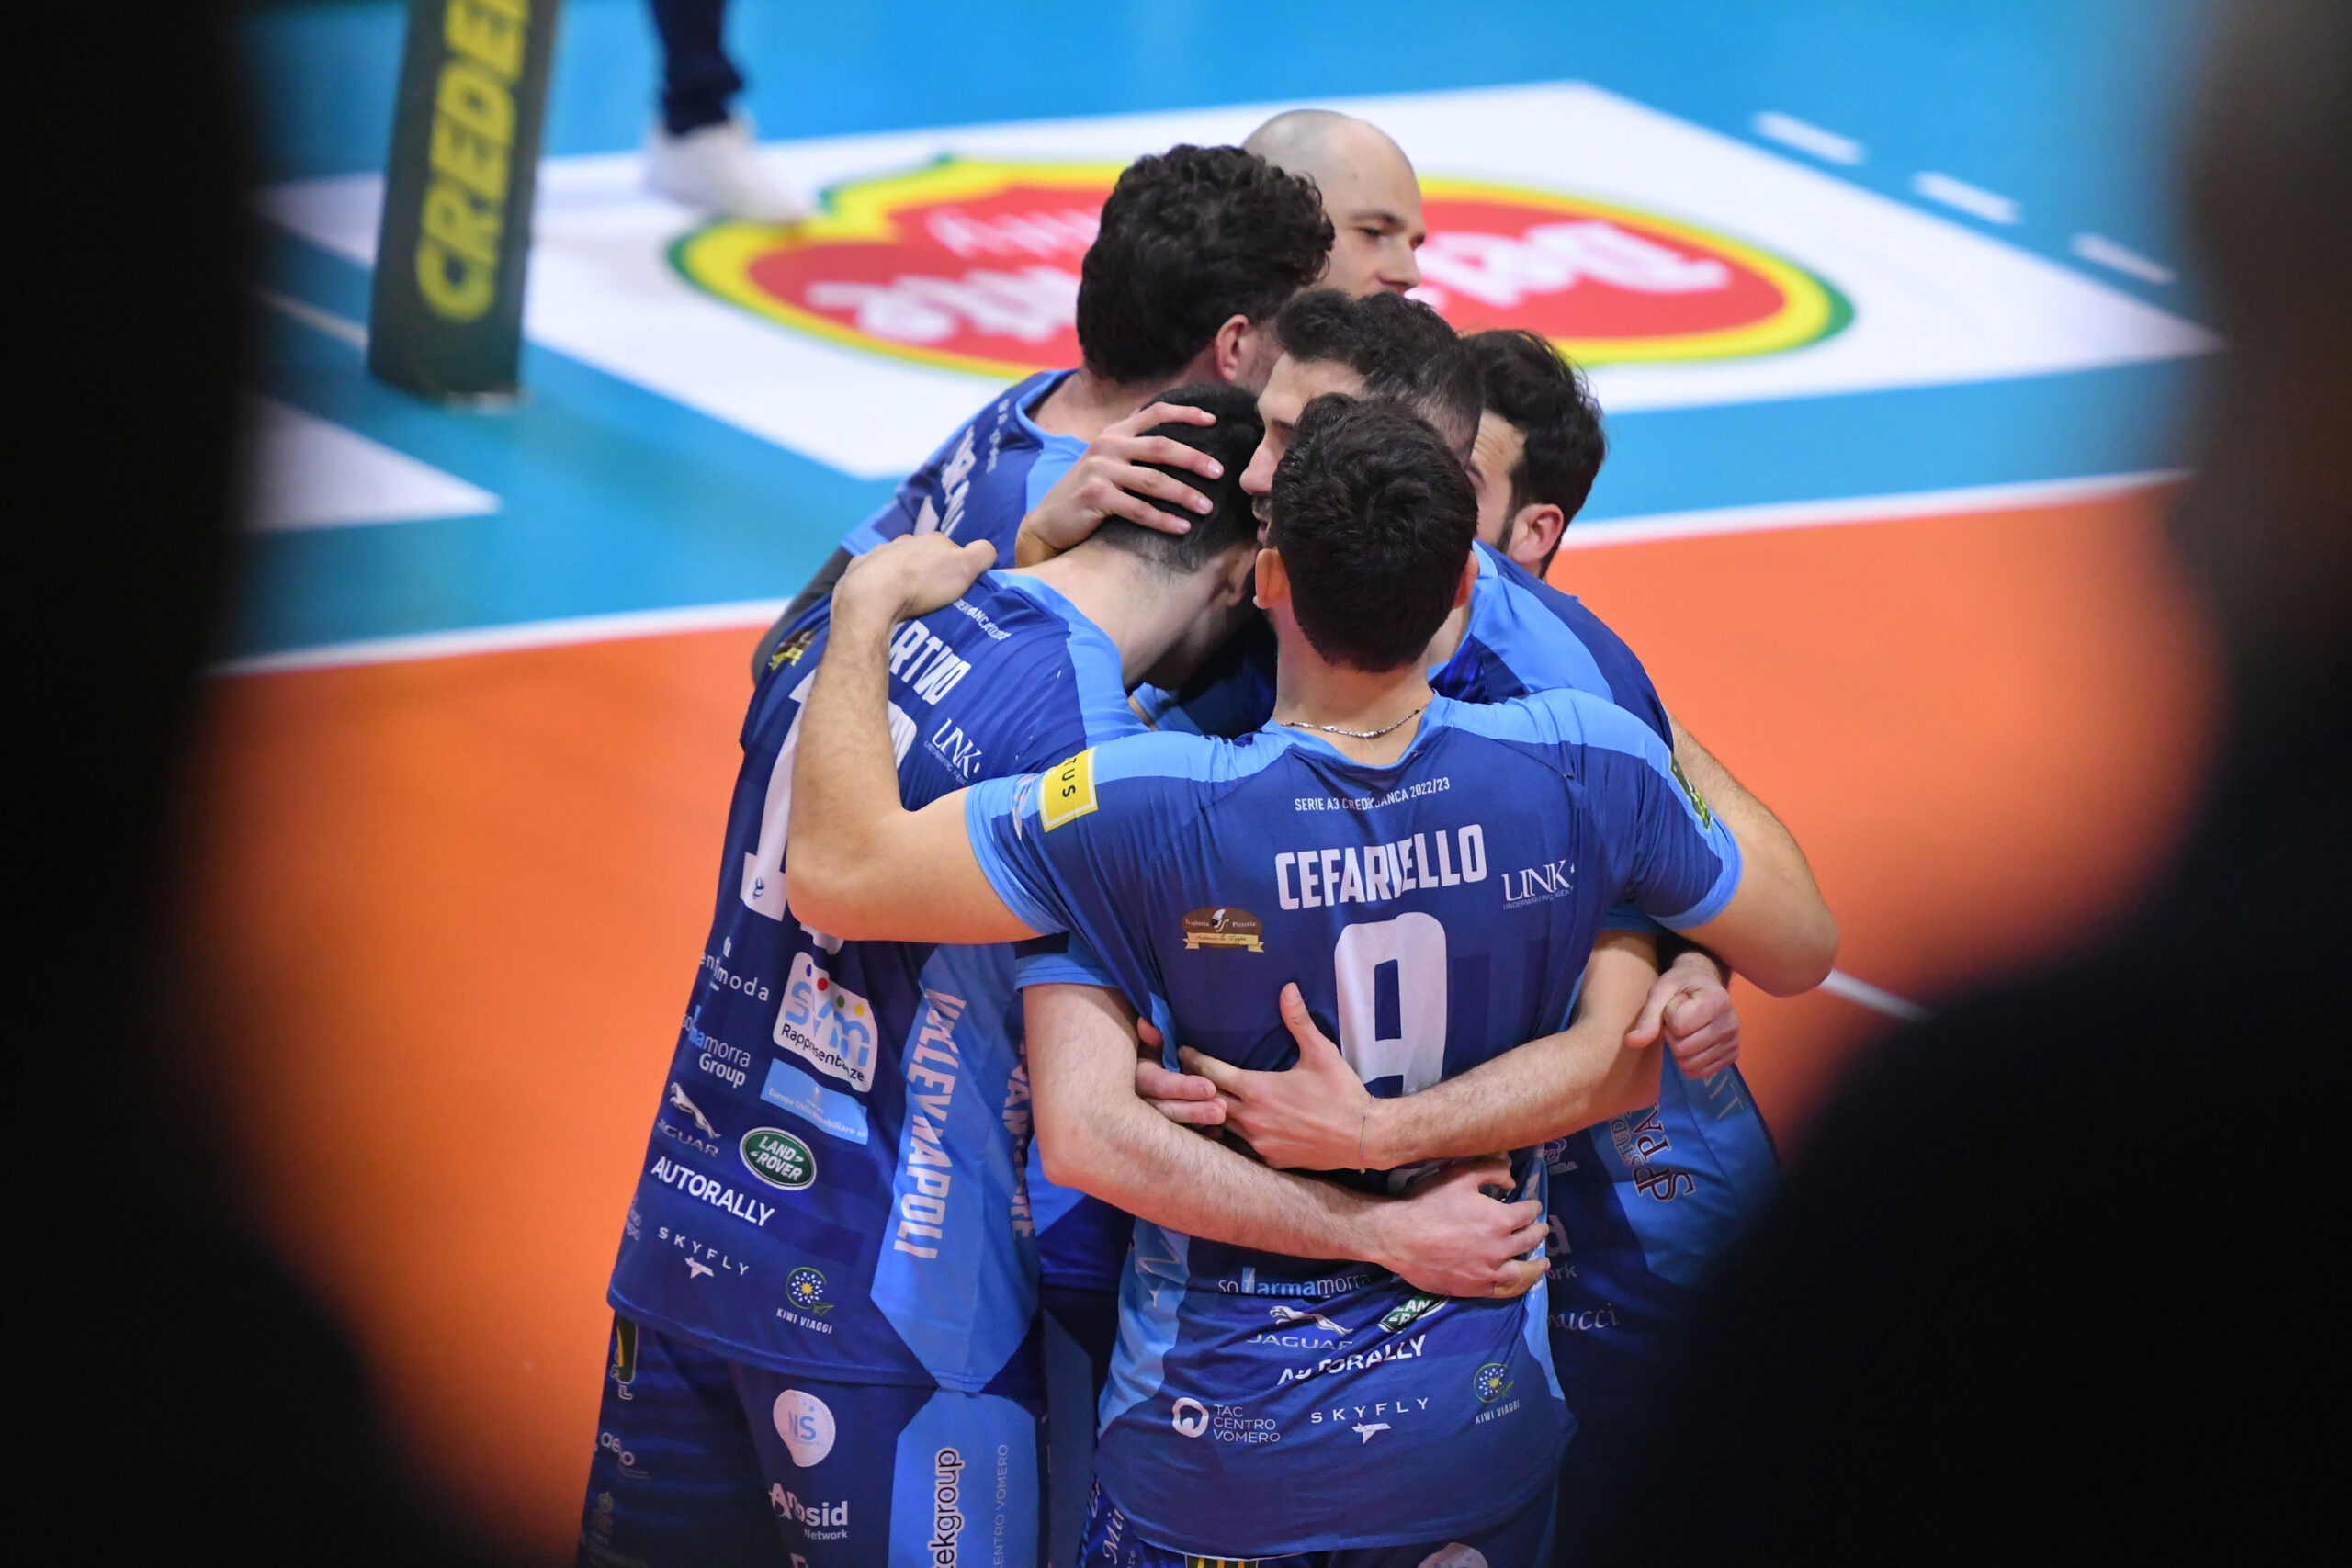 https://www.teamvolleynapoli.it/wp-content/uploads/2023/06/Napoli-Catania_211-scaled.jpg